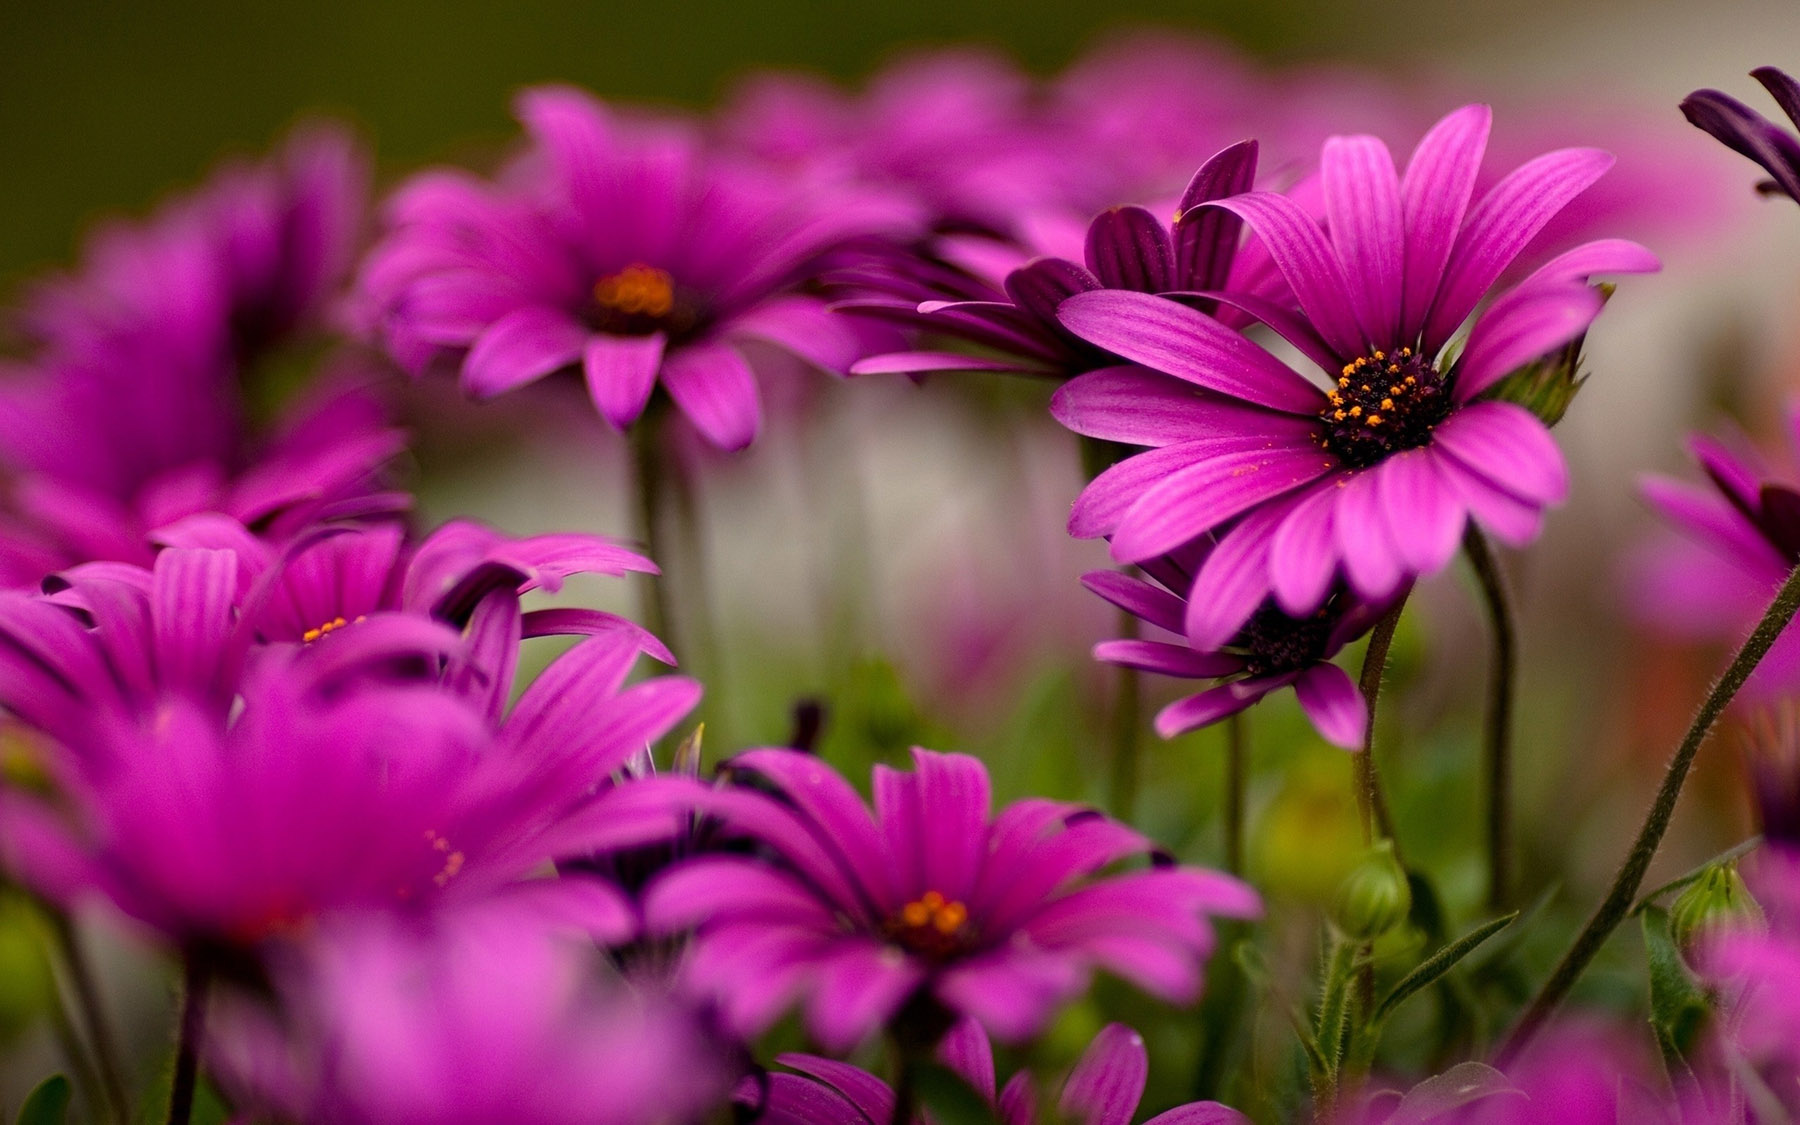 Photo of Spring Flowers (Image by RawPixel.com)